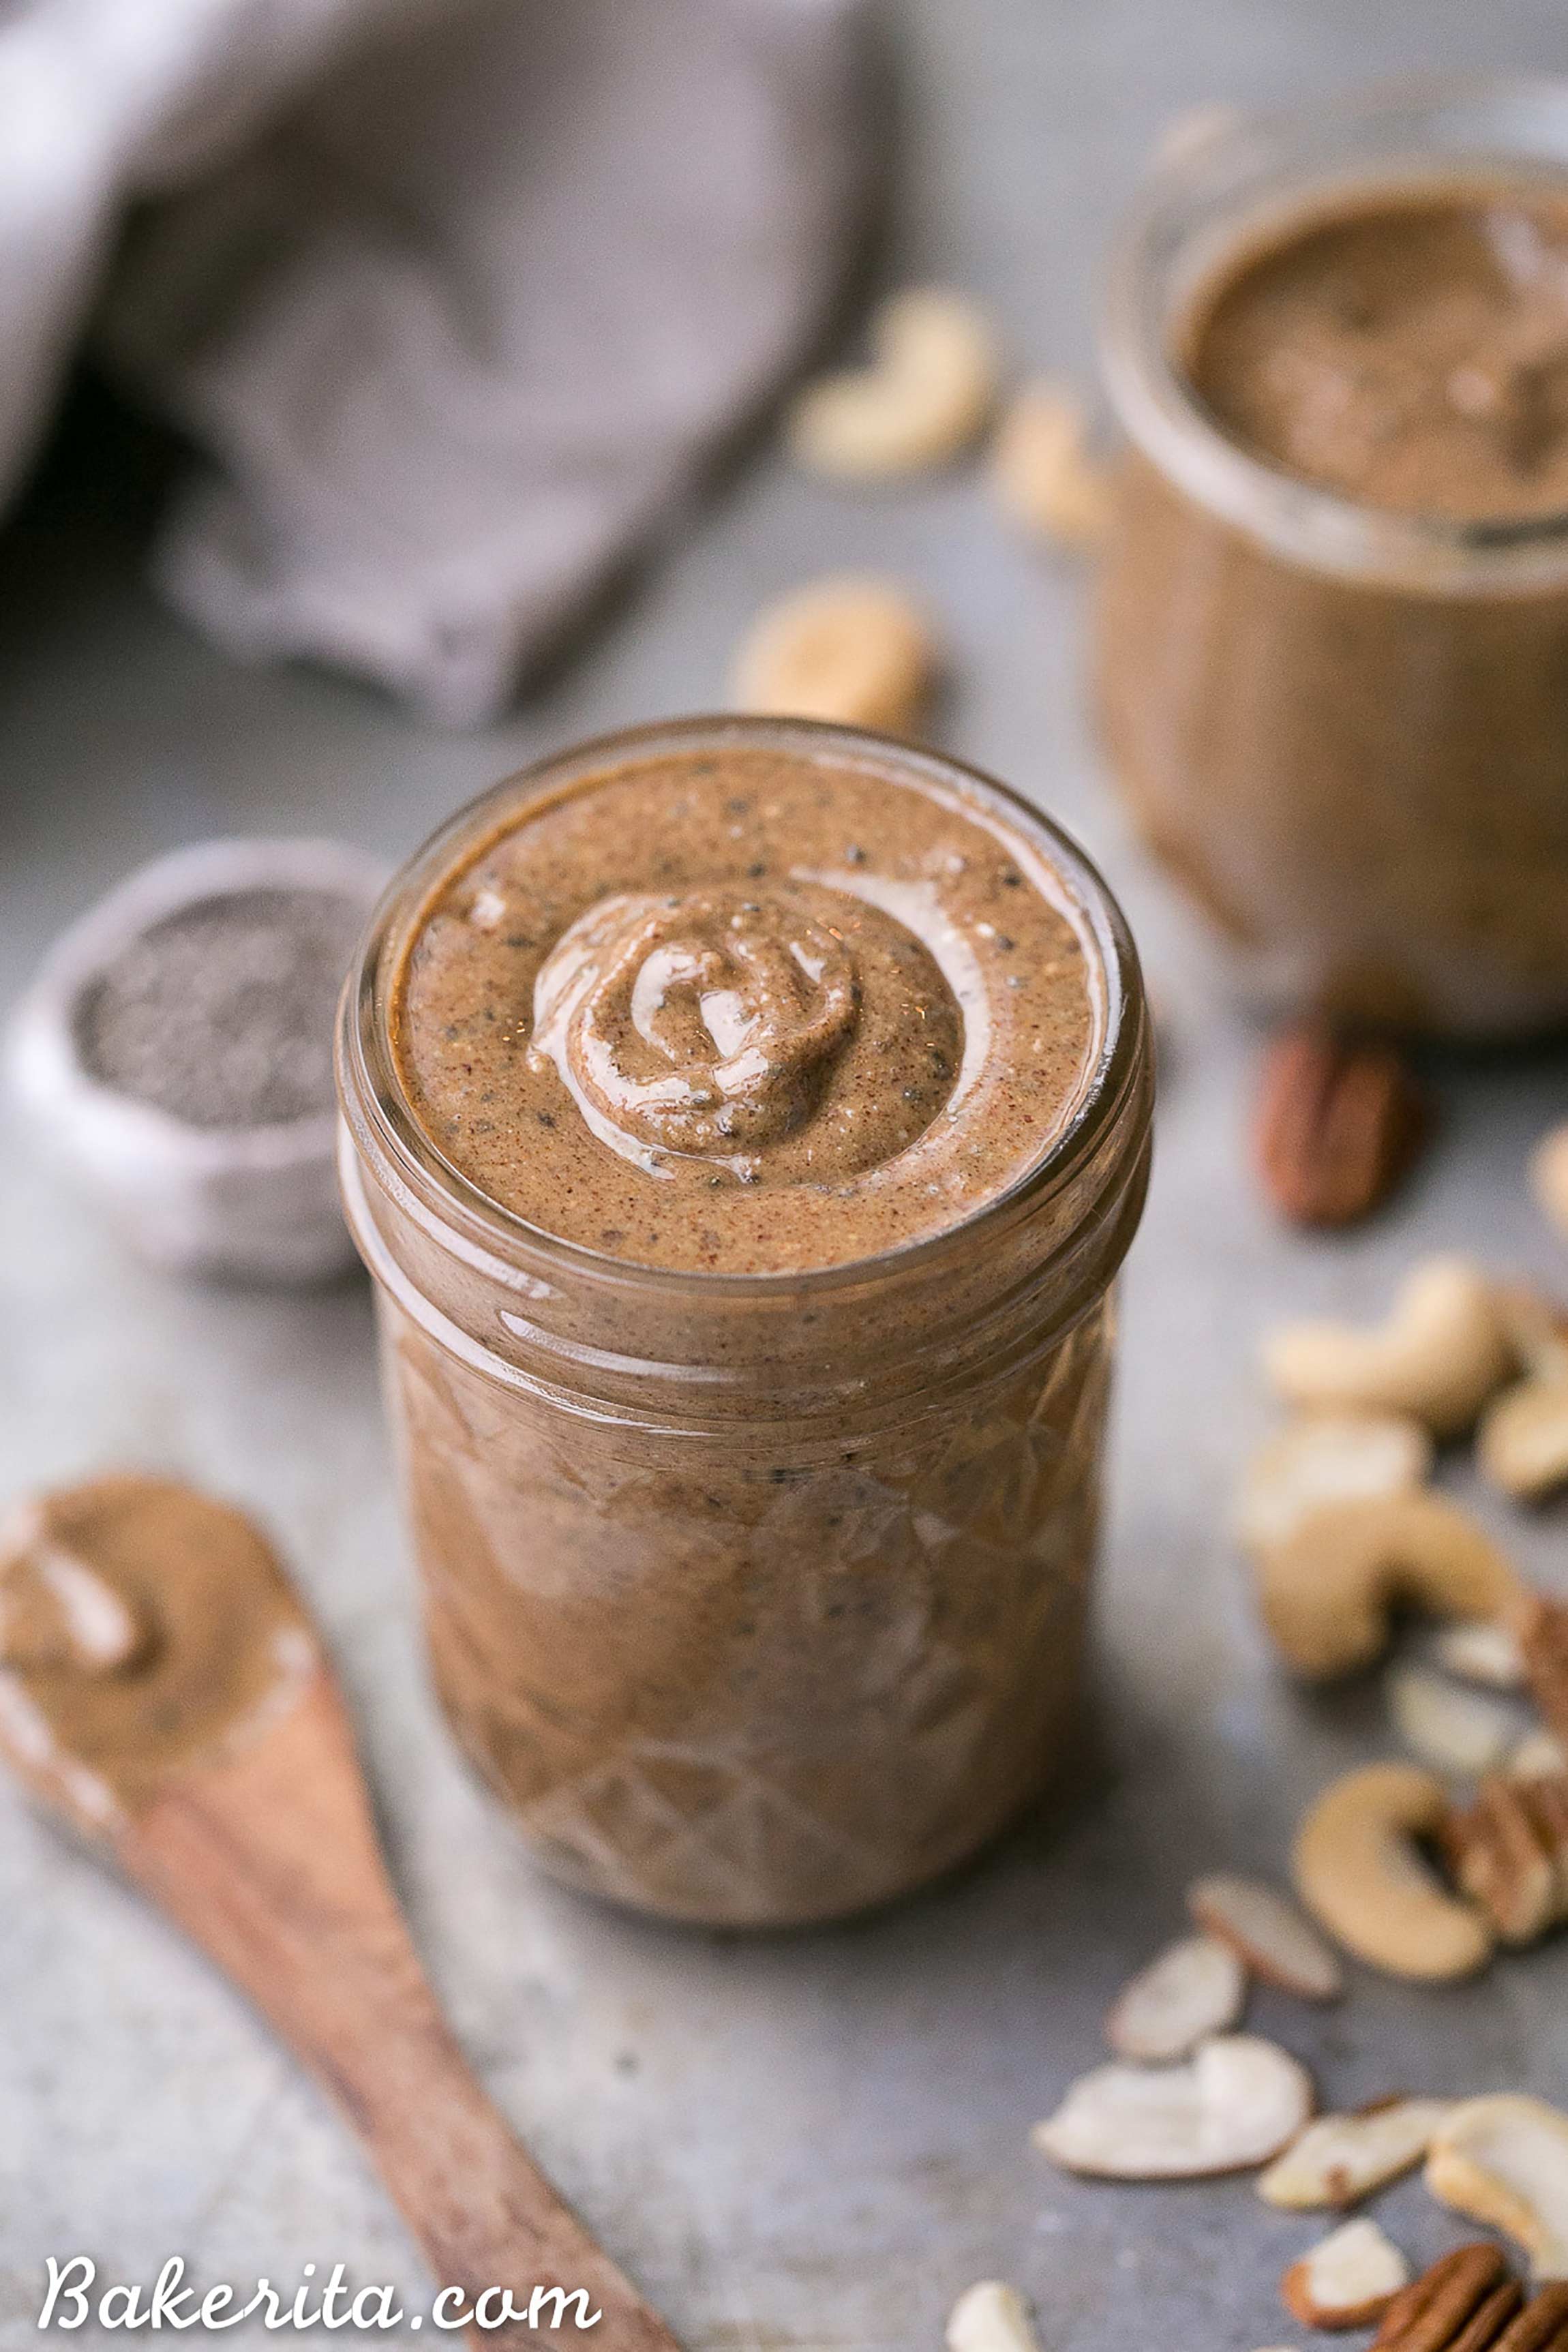 Super Seed Nut Butter